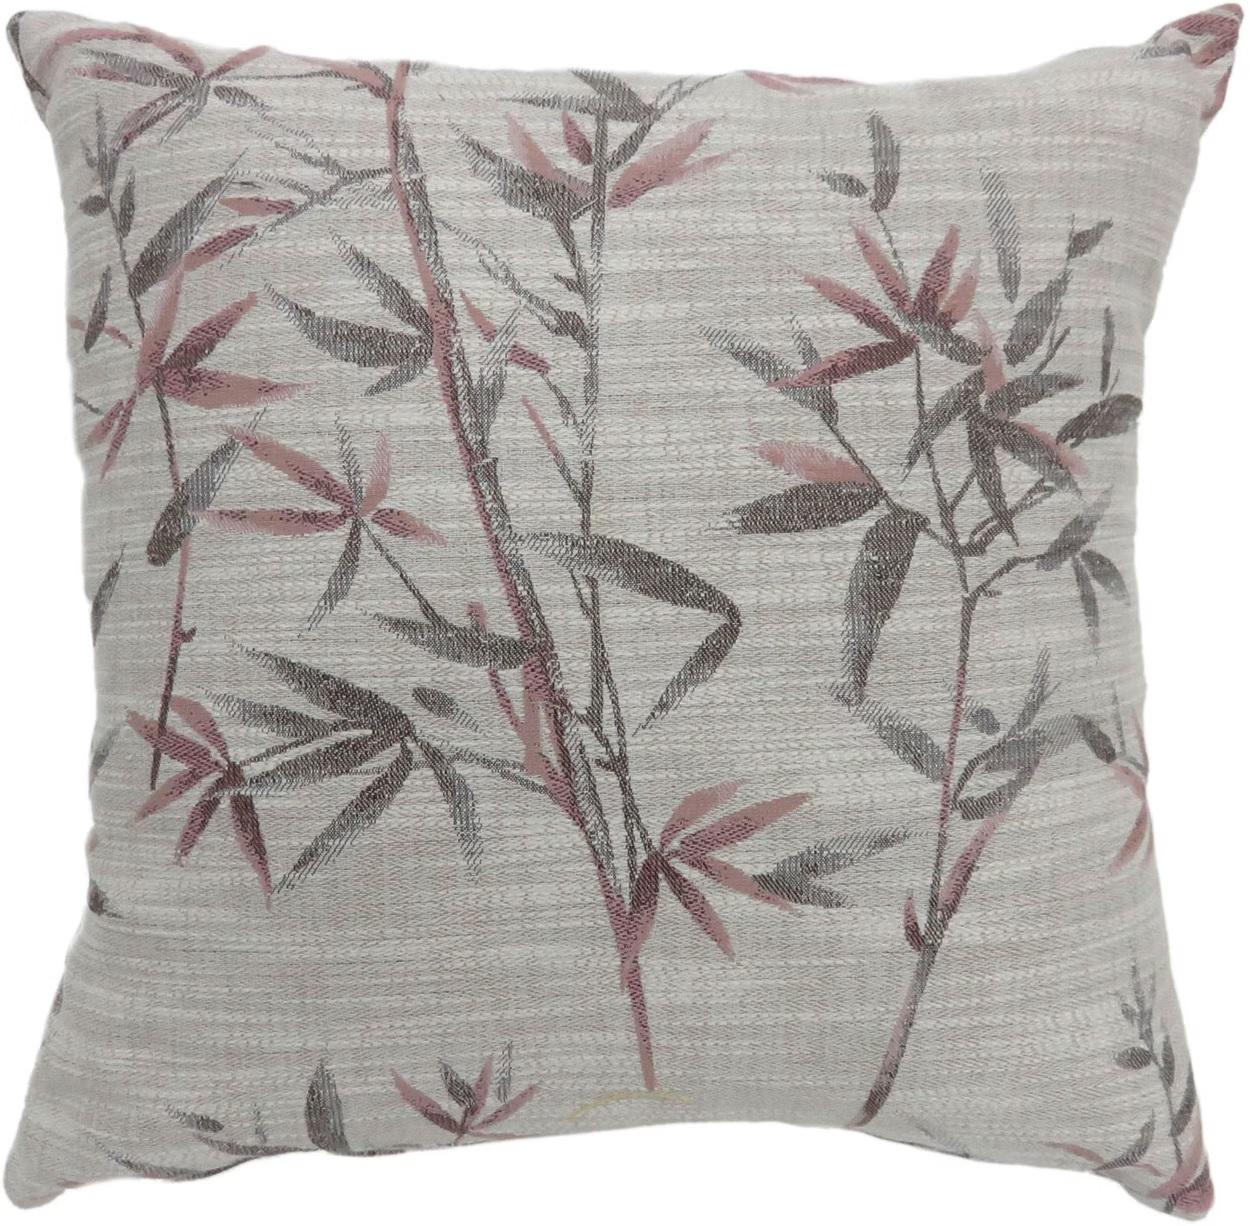 Transitional Throw Pillow PL6031RD-S Anika PL6031RD-S in Red 